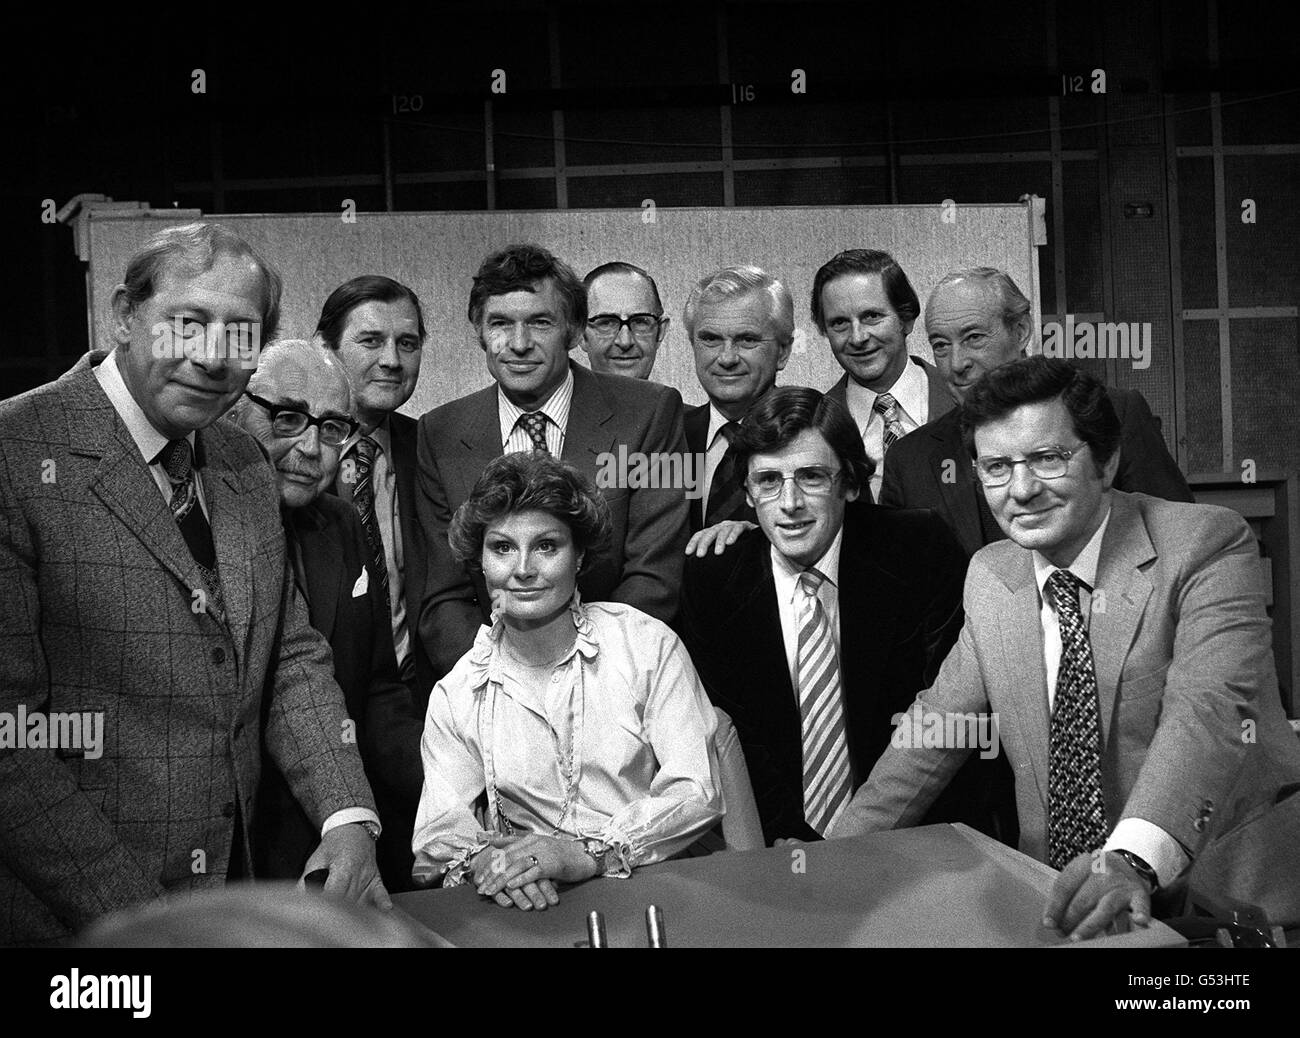 BBC TV newsreaders past and present at the BBC TV centre in London, where they celebrated 25 years of BBC TV News. L-R (standing): Peter Woods, John Snagge, Corbet Woodall, Bob Langley, Colin Doran, Kenneth Kenall, John Simpson and Robert Dougall. * L-R (seated) Angela Rippon, Richard Whitmore and Richard Baker (who will read the 25th Anniversary News at Nine - exactly 25 years after he read the first TV news bulletin). 13/10/00: The BBC evening news bulletin will move from 9pm to 10pm from October16th as part of BBC one's autumn's schedule. Stock Photo